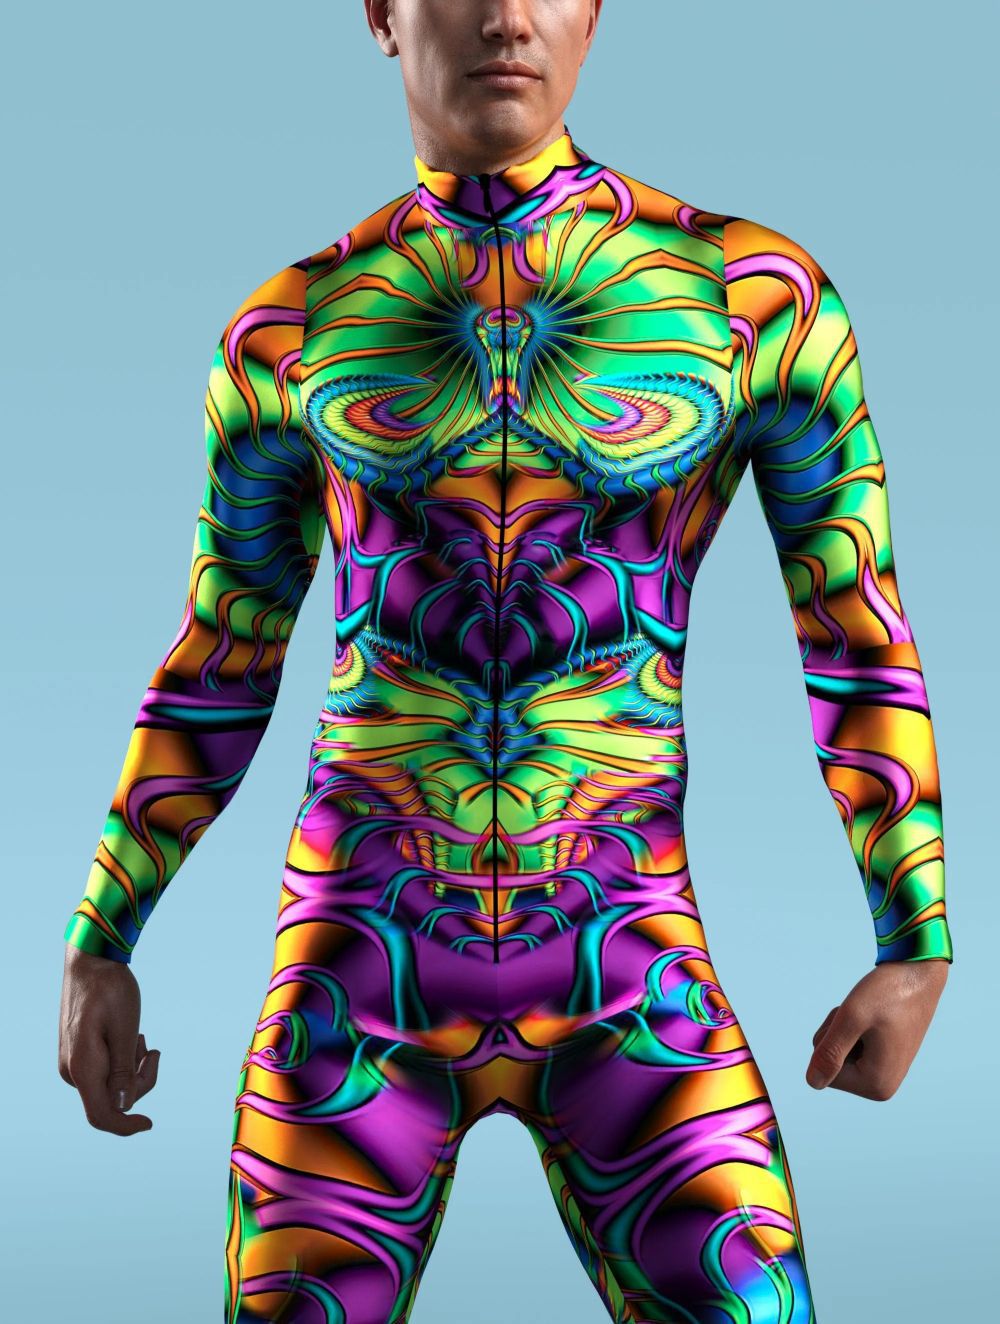 A man wearing a colorful, psychedelic-patterned Maramalive™ 3D Digital Printed Cosplay One-piece Costume made from a chemical fiber blend strikes a pose against a plain blue background, evoking European and American style with an air of game animation role-playing.